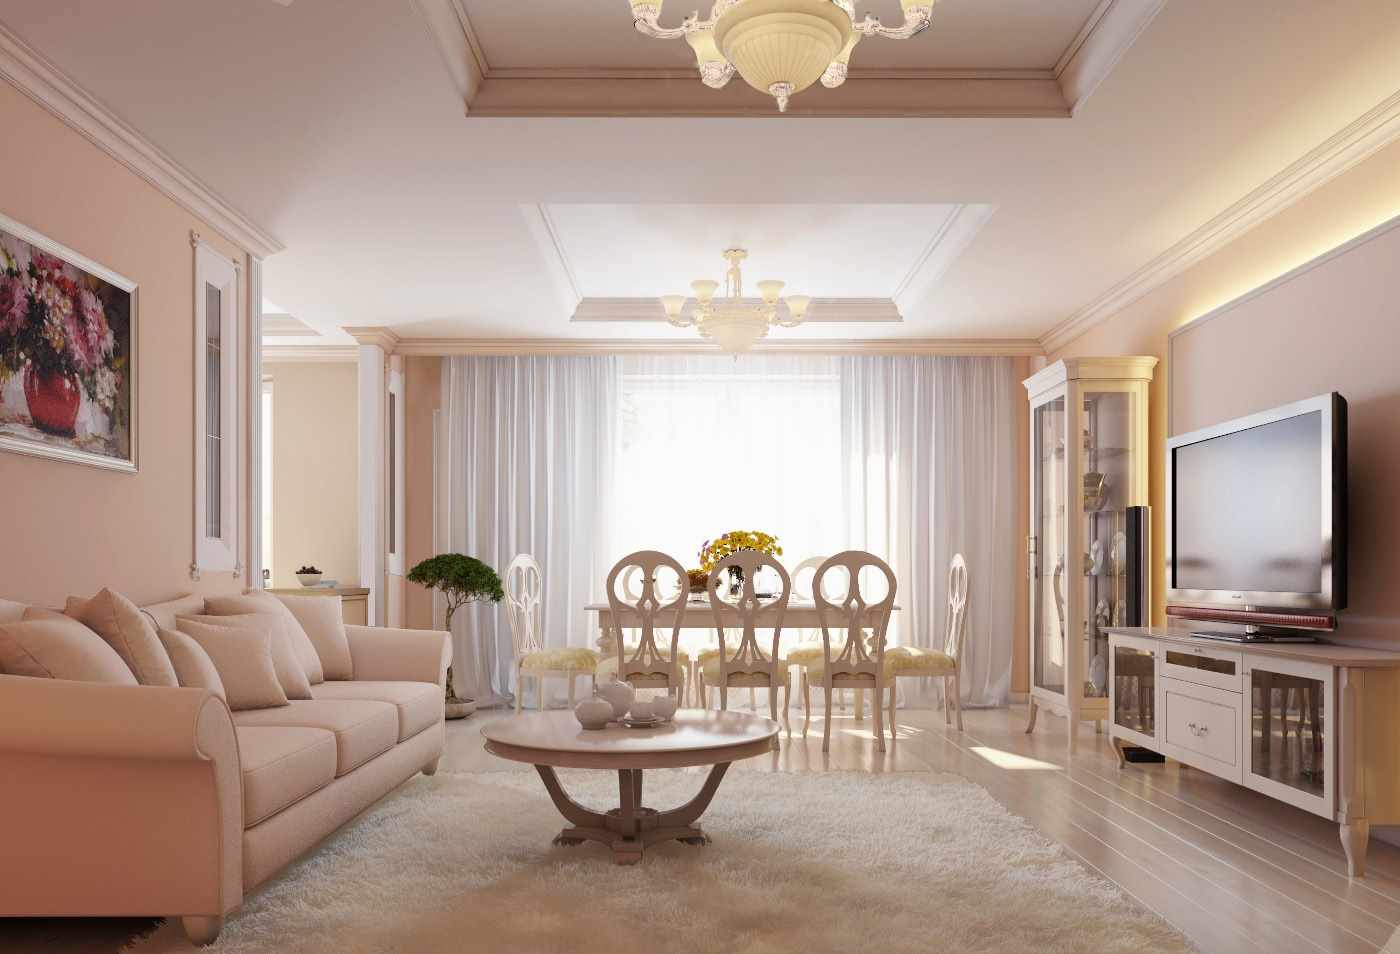 the idea of ​​combining a beautiful peach color in the decor of the apartment